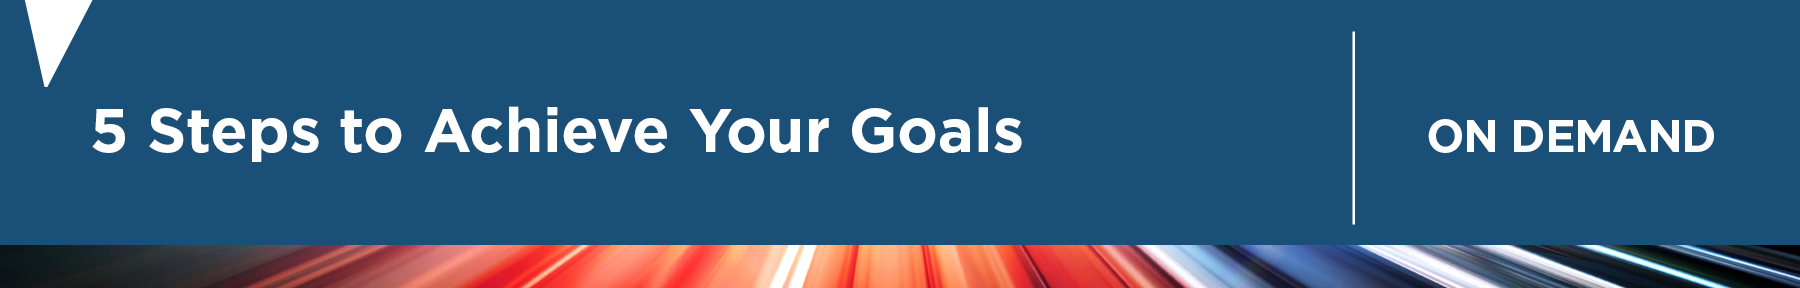 5 Steps to Achieve Your Goals in 2020